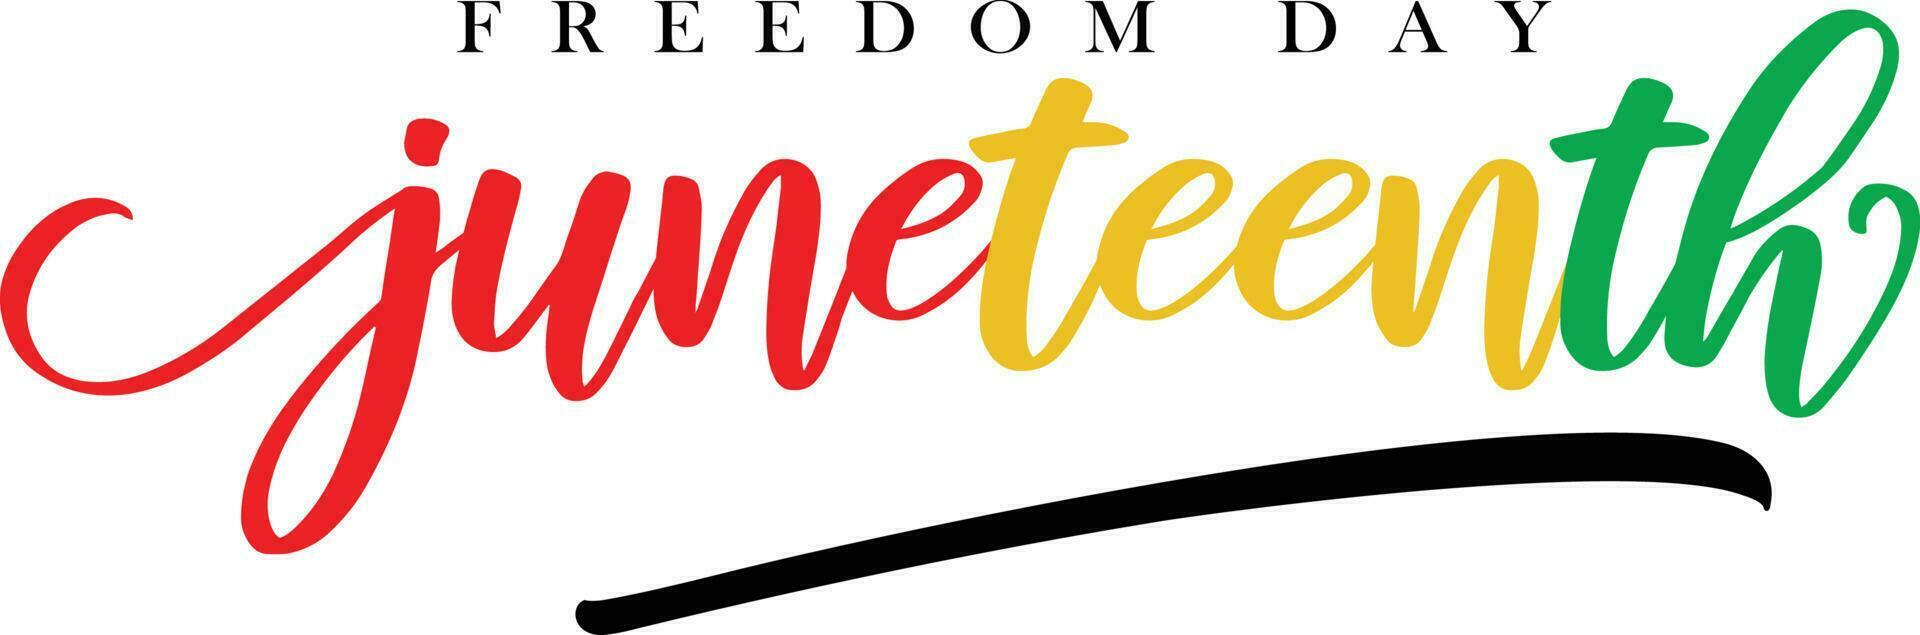 juneteenth handwritten calligraphic lettering over white background - freedom day lettering vector